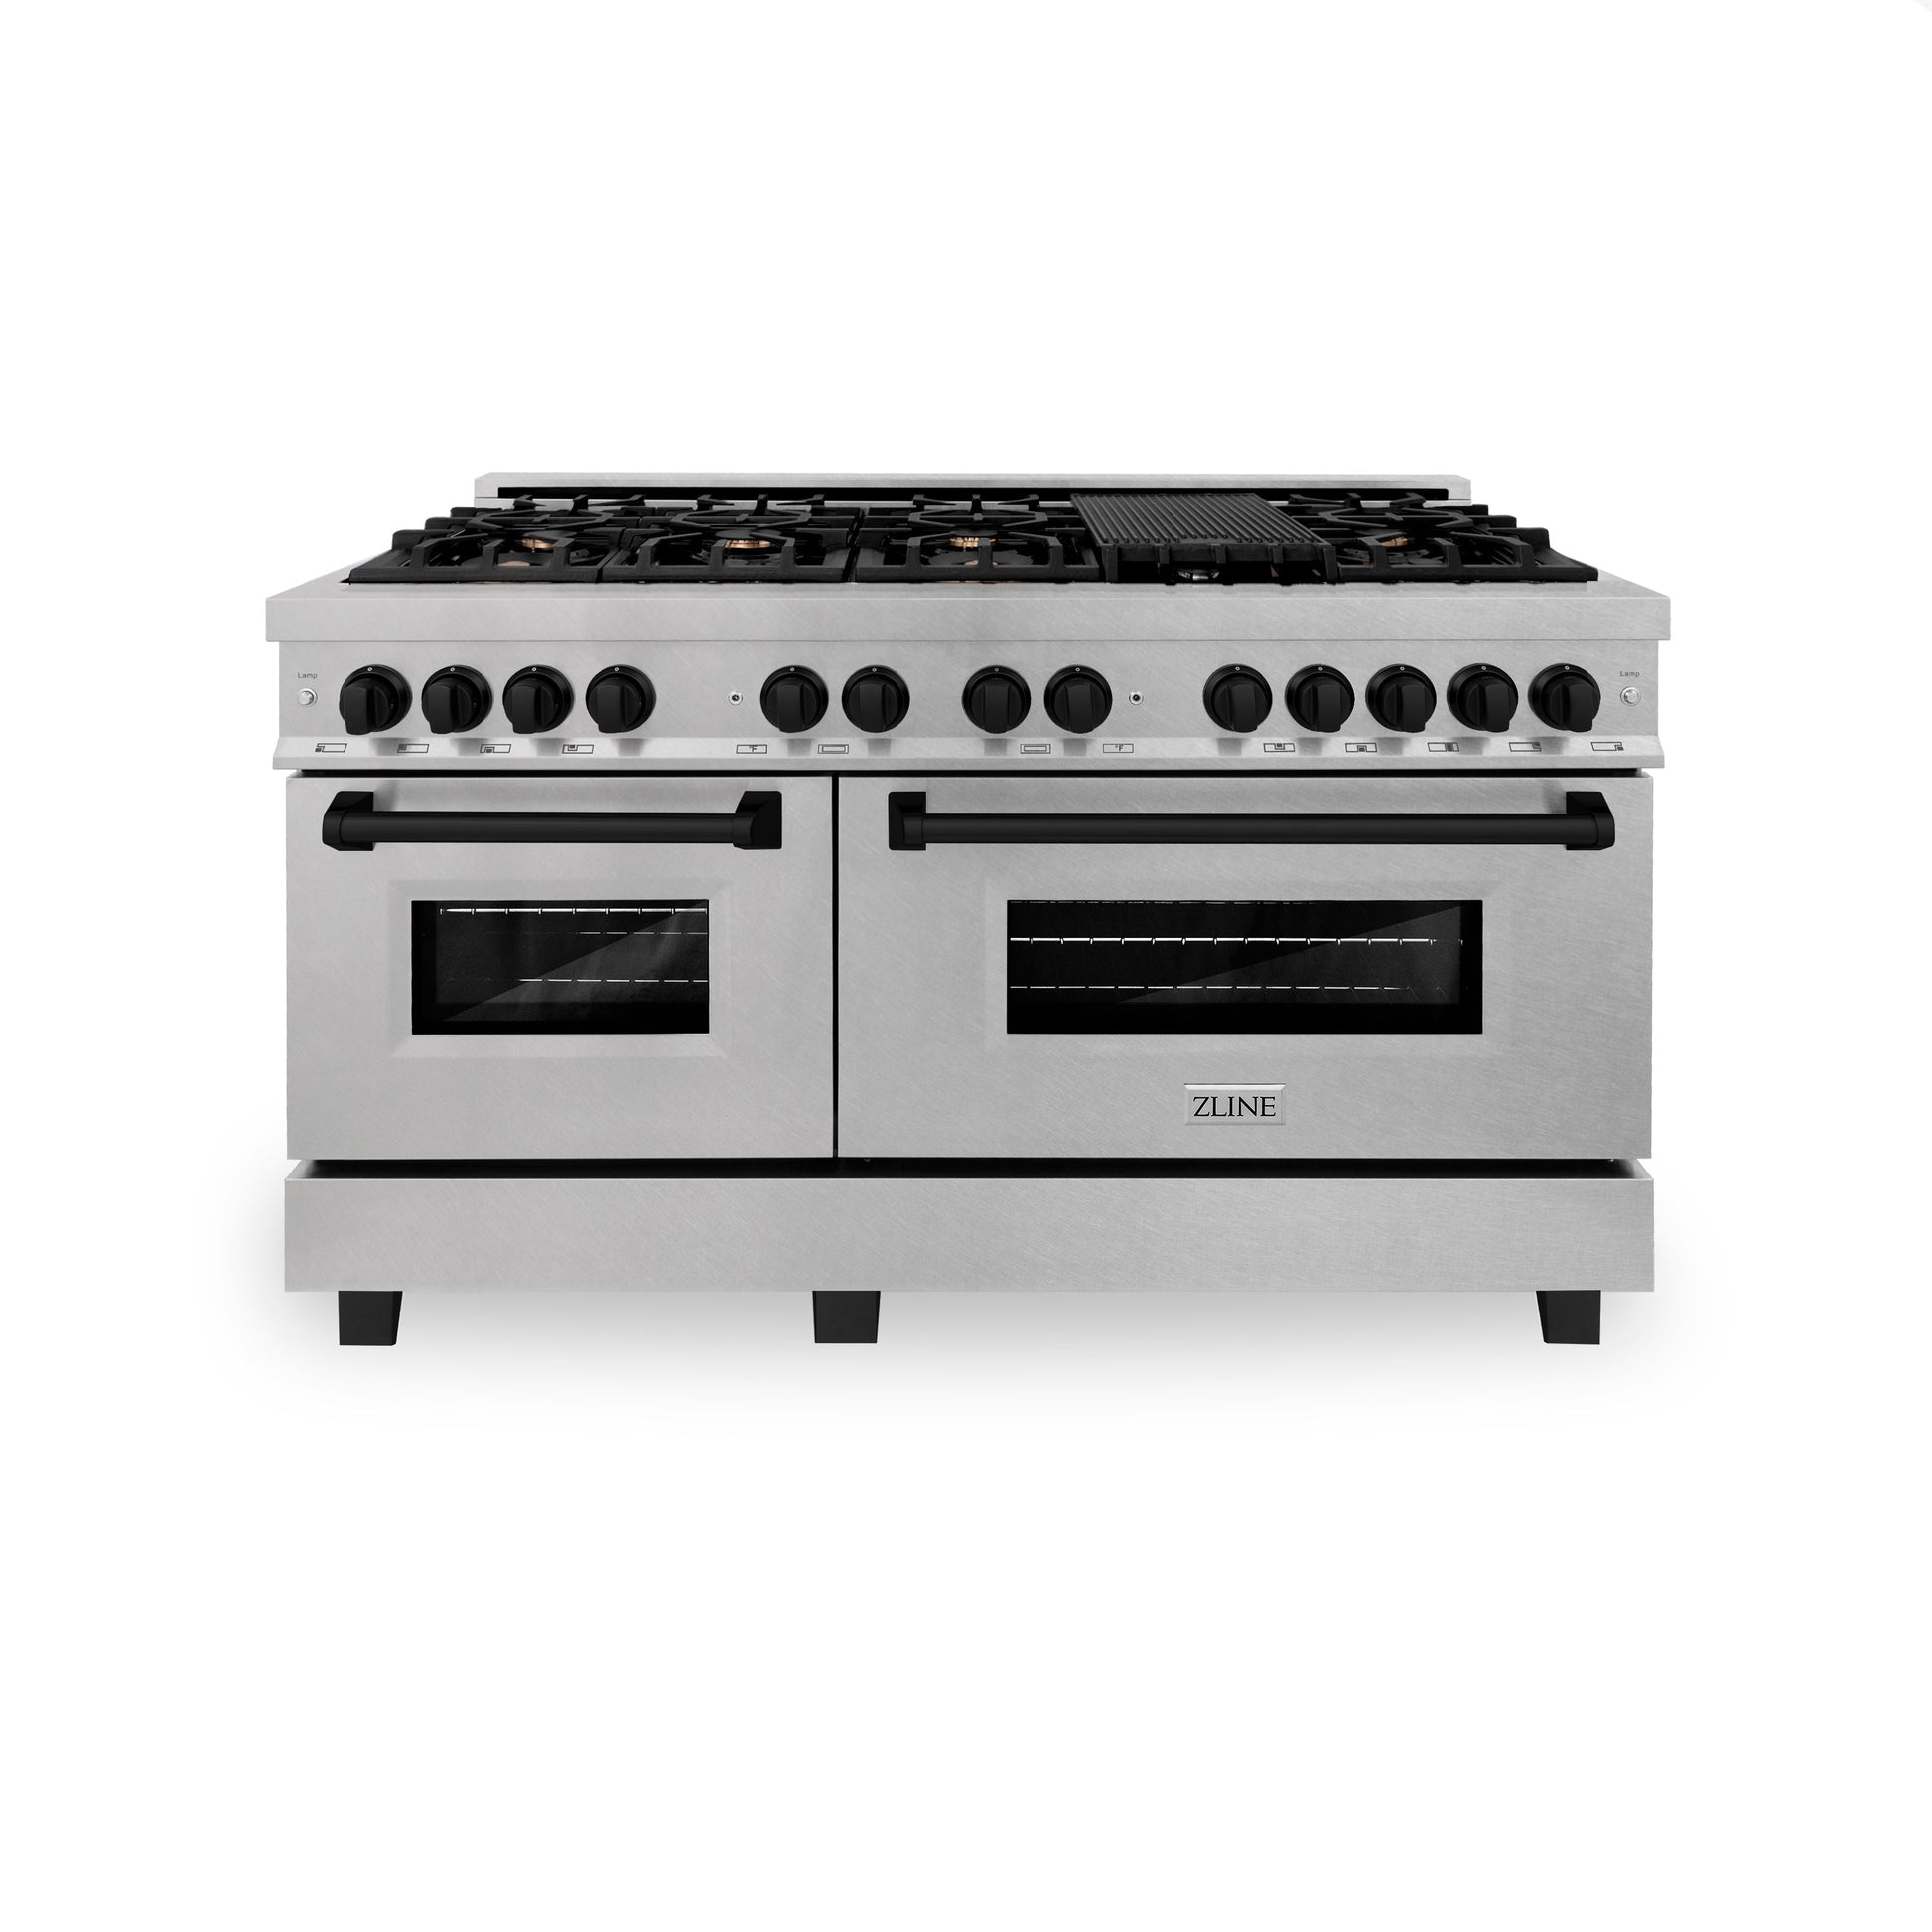 ZLINE Autograph Edition 60" Dual Fuel Range with Gas Stove and Electric Oven - DuraSnow Stainless Steel with Accents